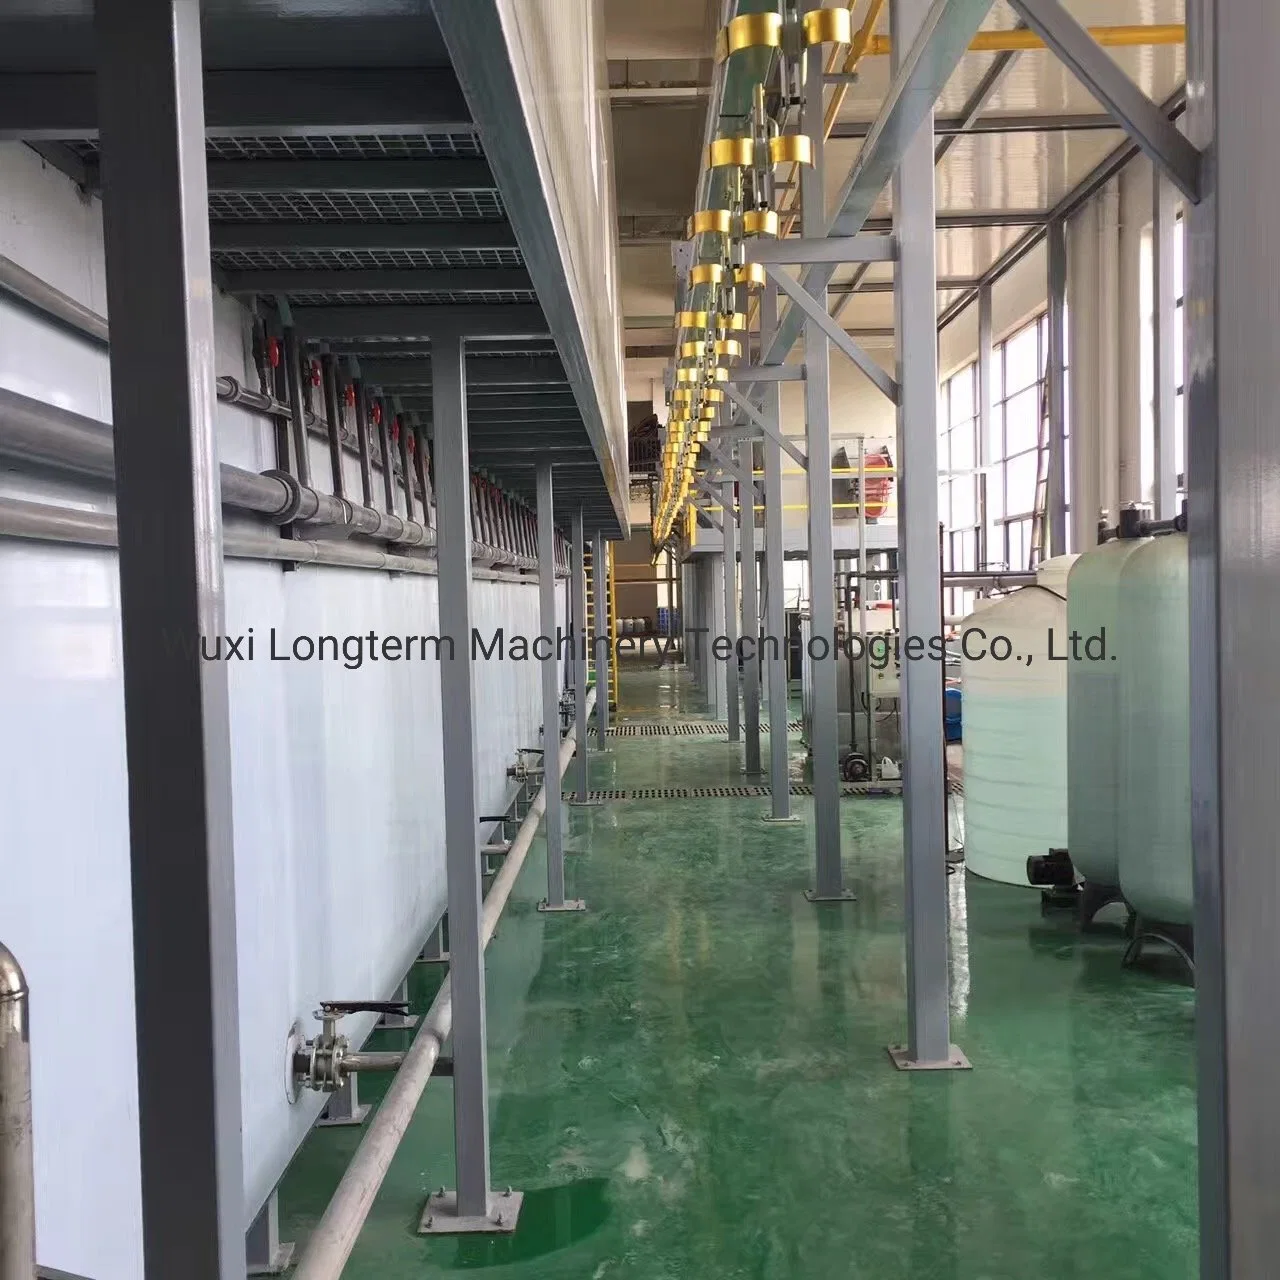 Professional Dust-Free Powder Coating System / Powder Coating Line for Hardware Metal Products